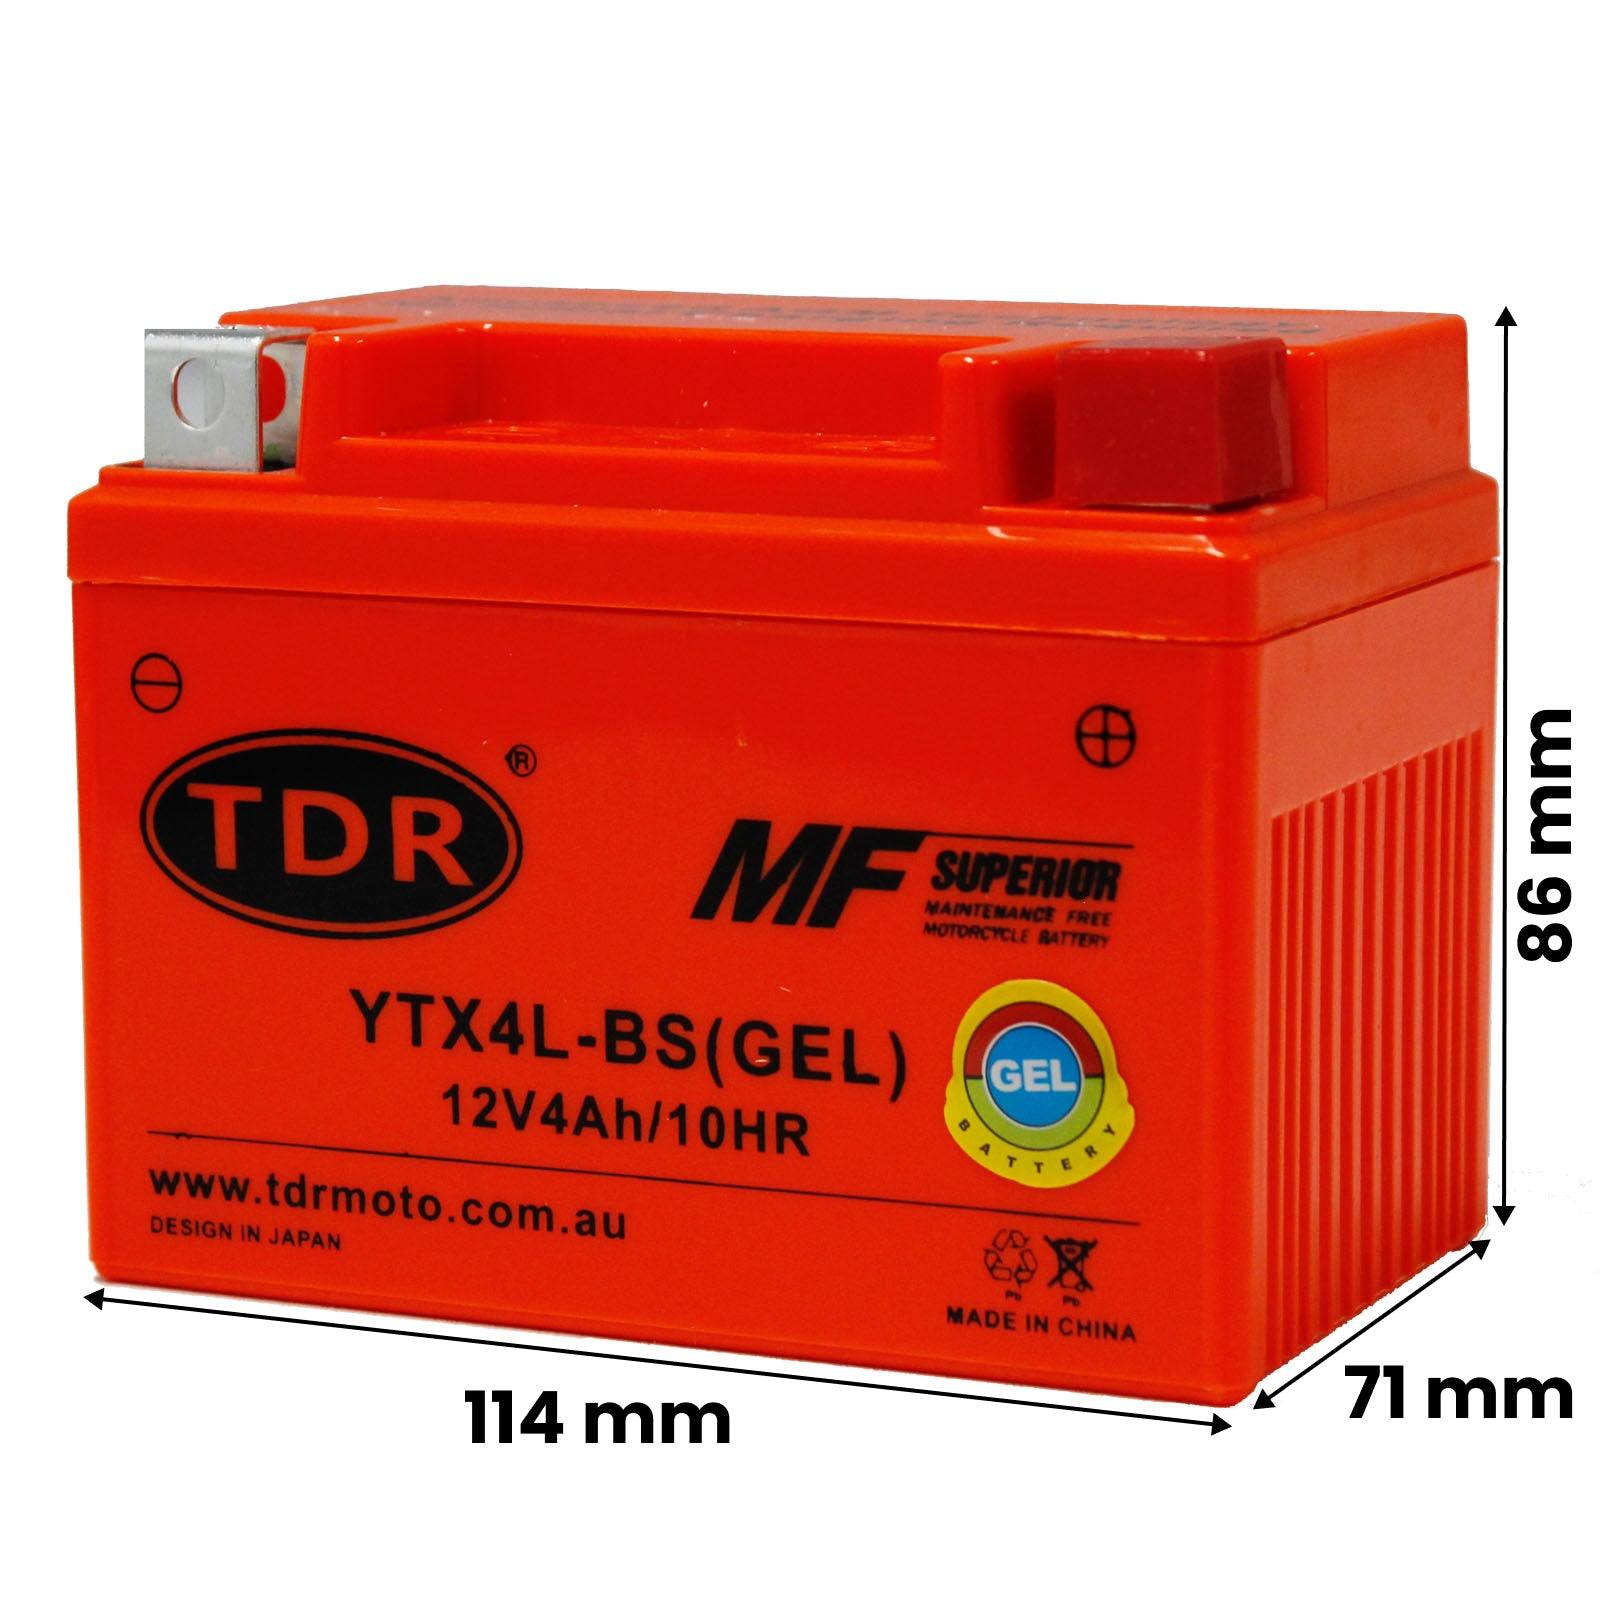 YTX4L-BS Maintenance Free AGM-iGEL Motorcycle Extreme High Performance  Battery Replacement SLA 12V 4Ah By Neptune Power